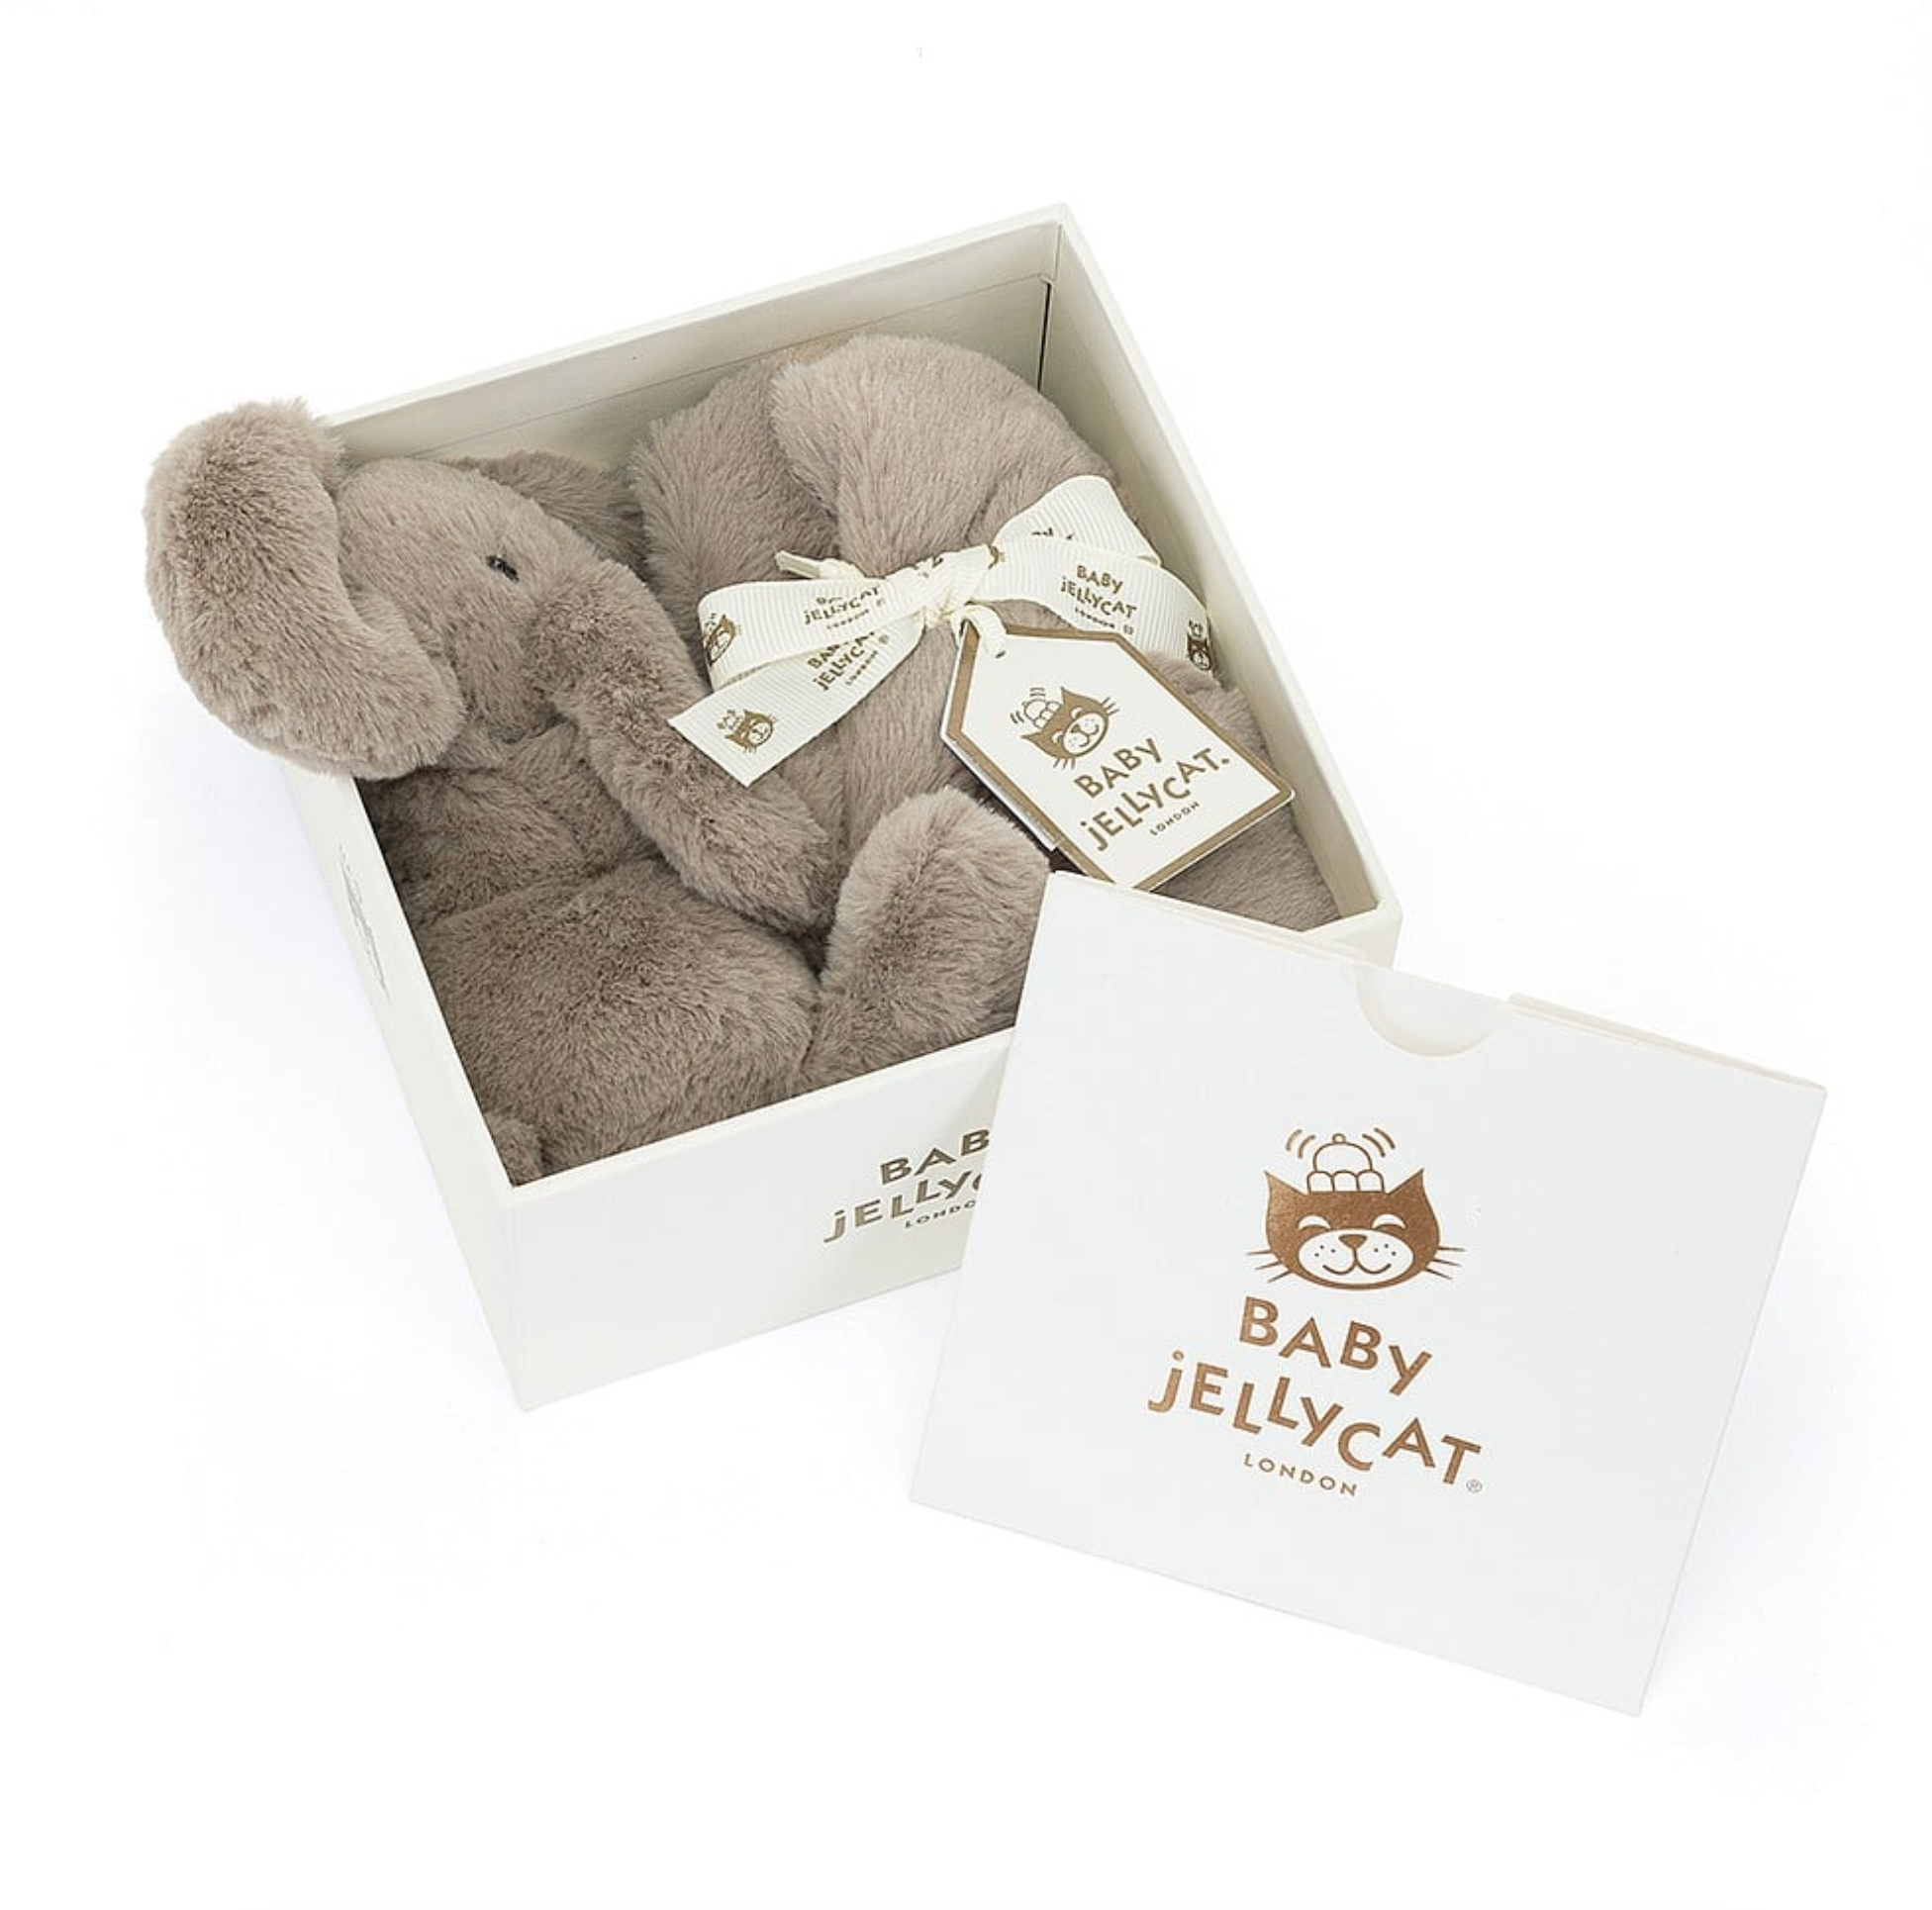 Smudge Elephant Soother boxed set